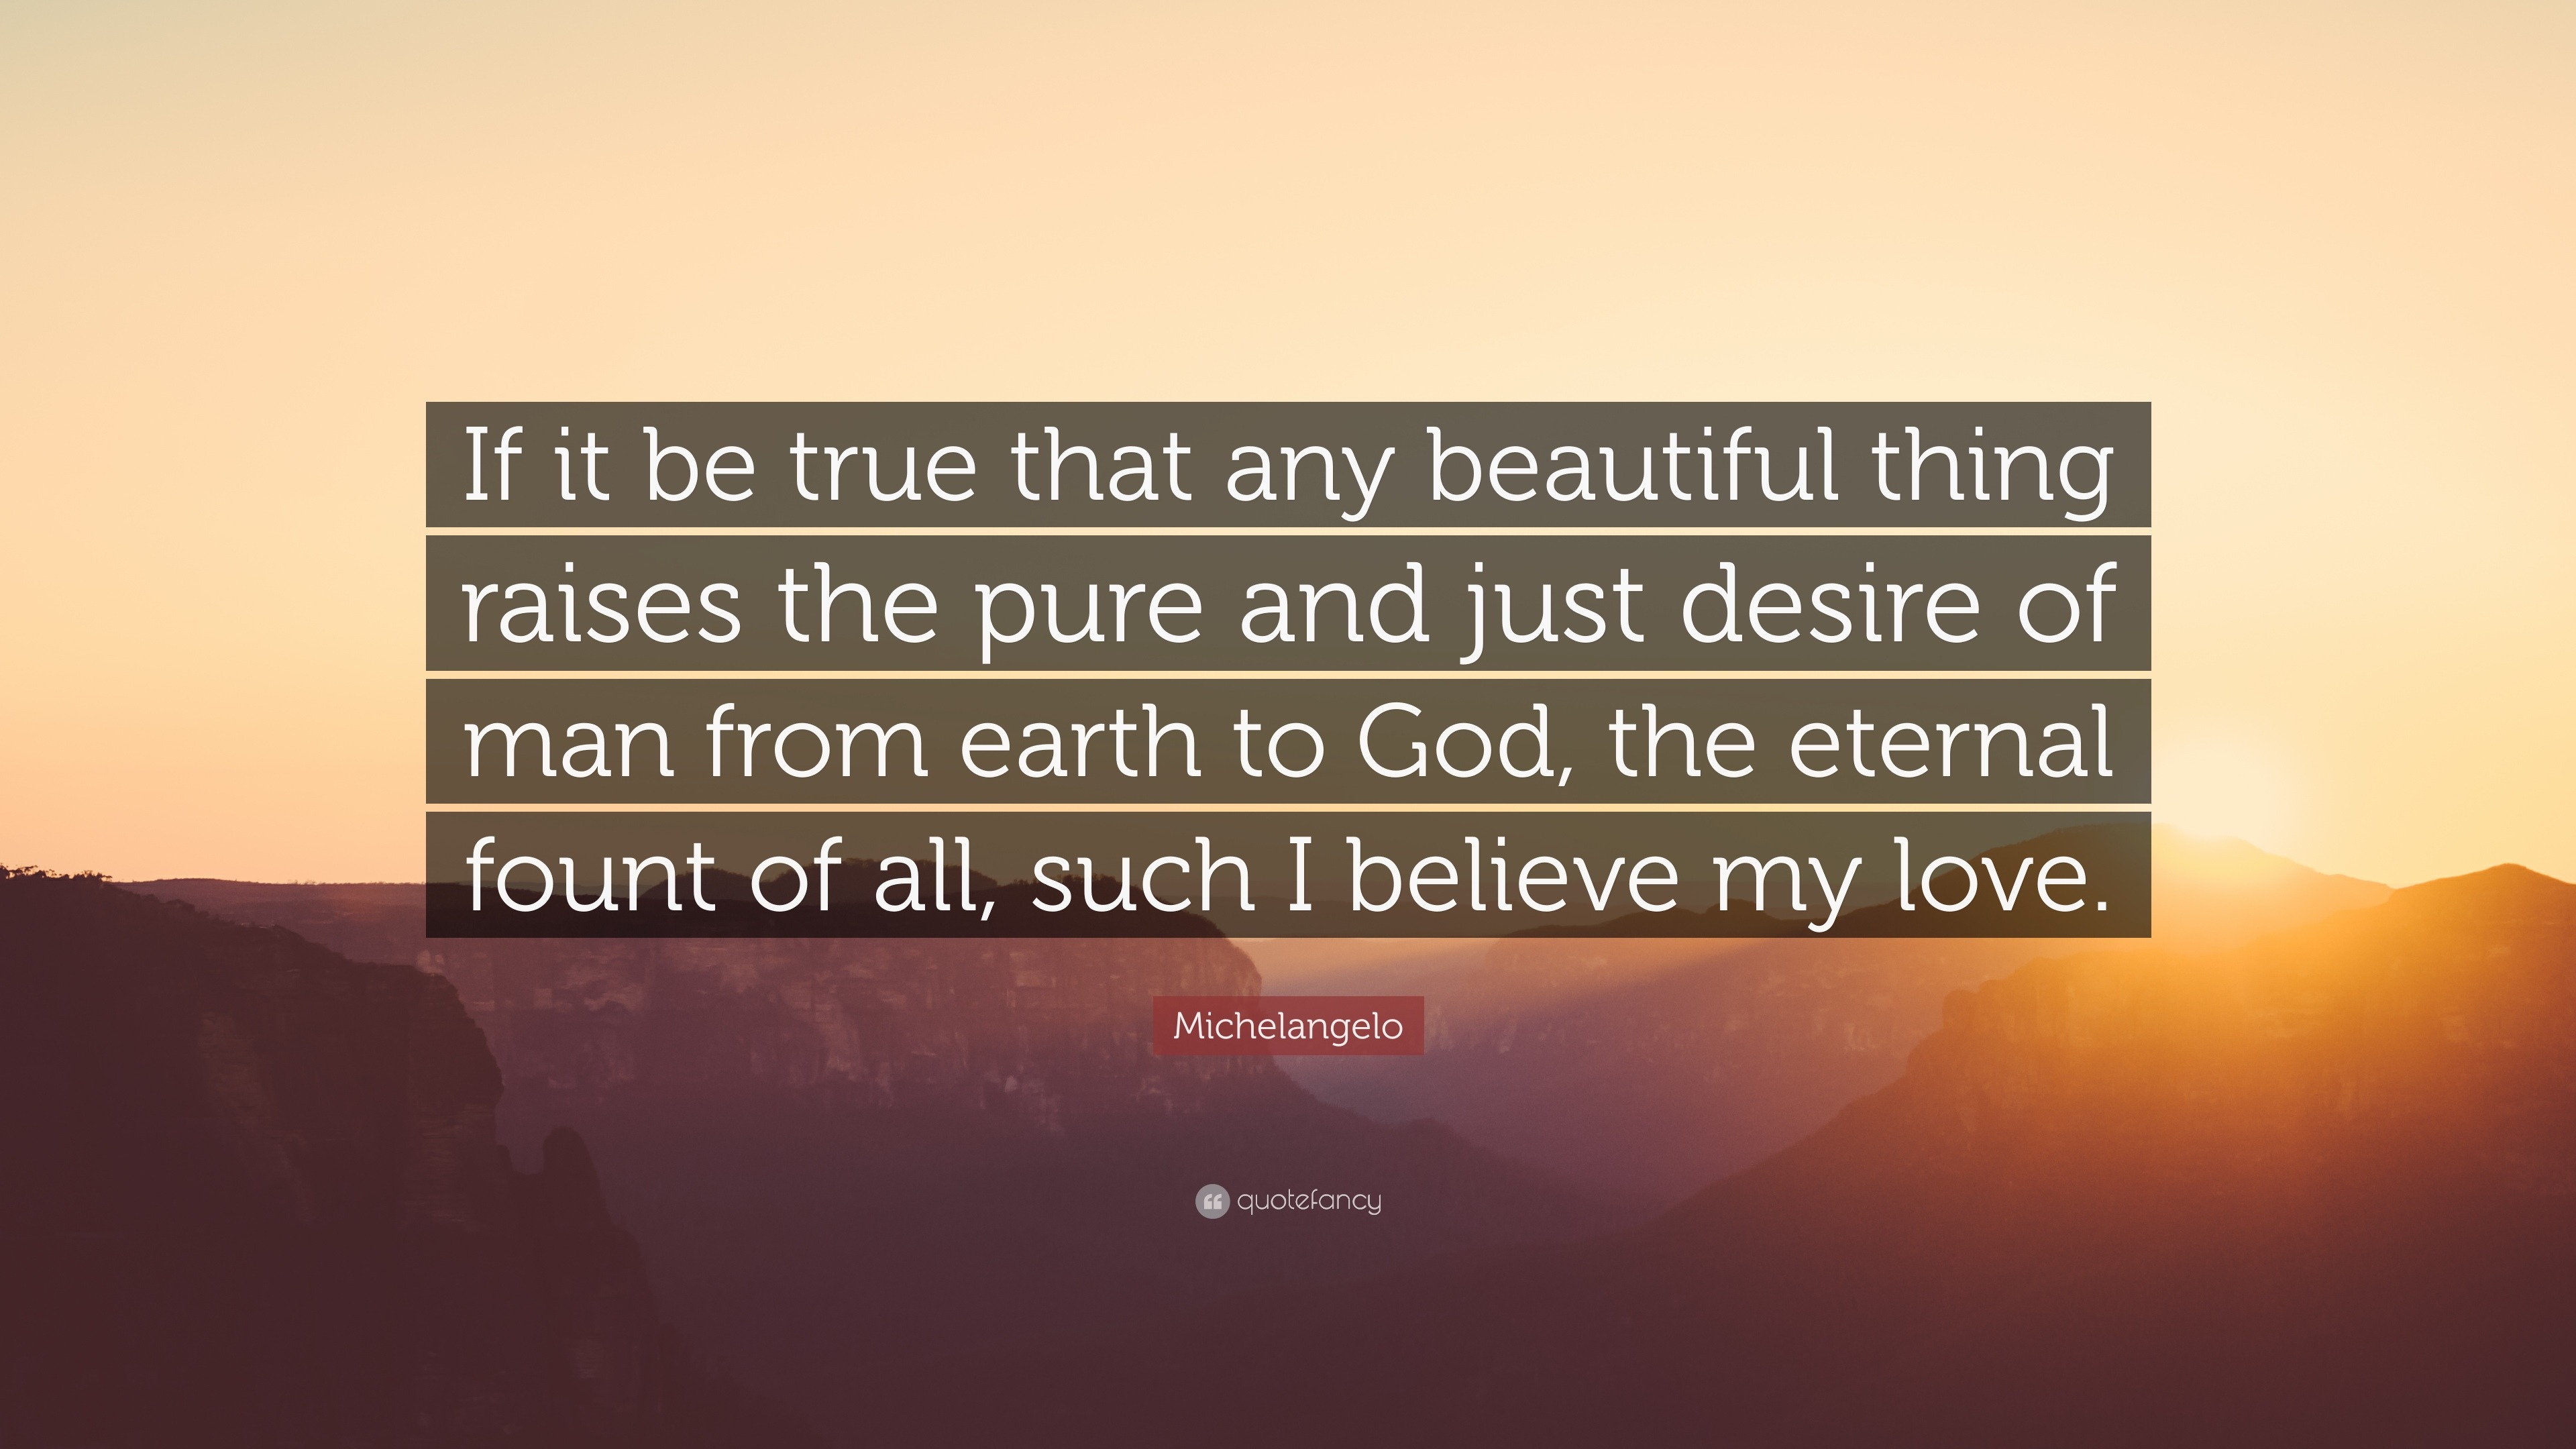 Michelangelo Quote “If it be true that any beautiful thing raises the pure and